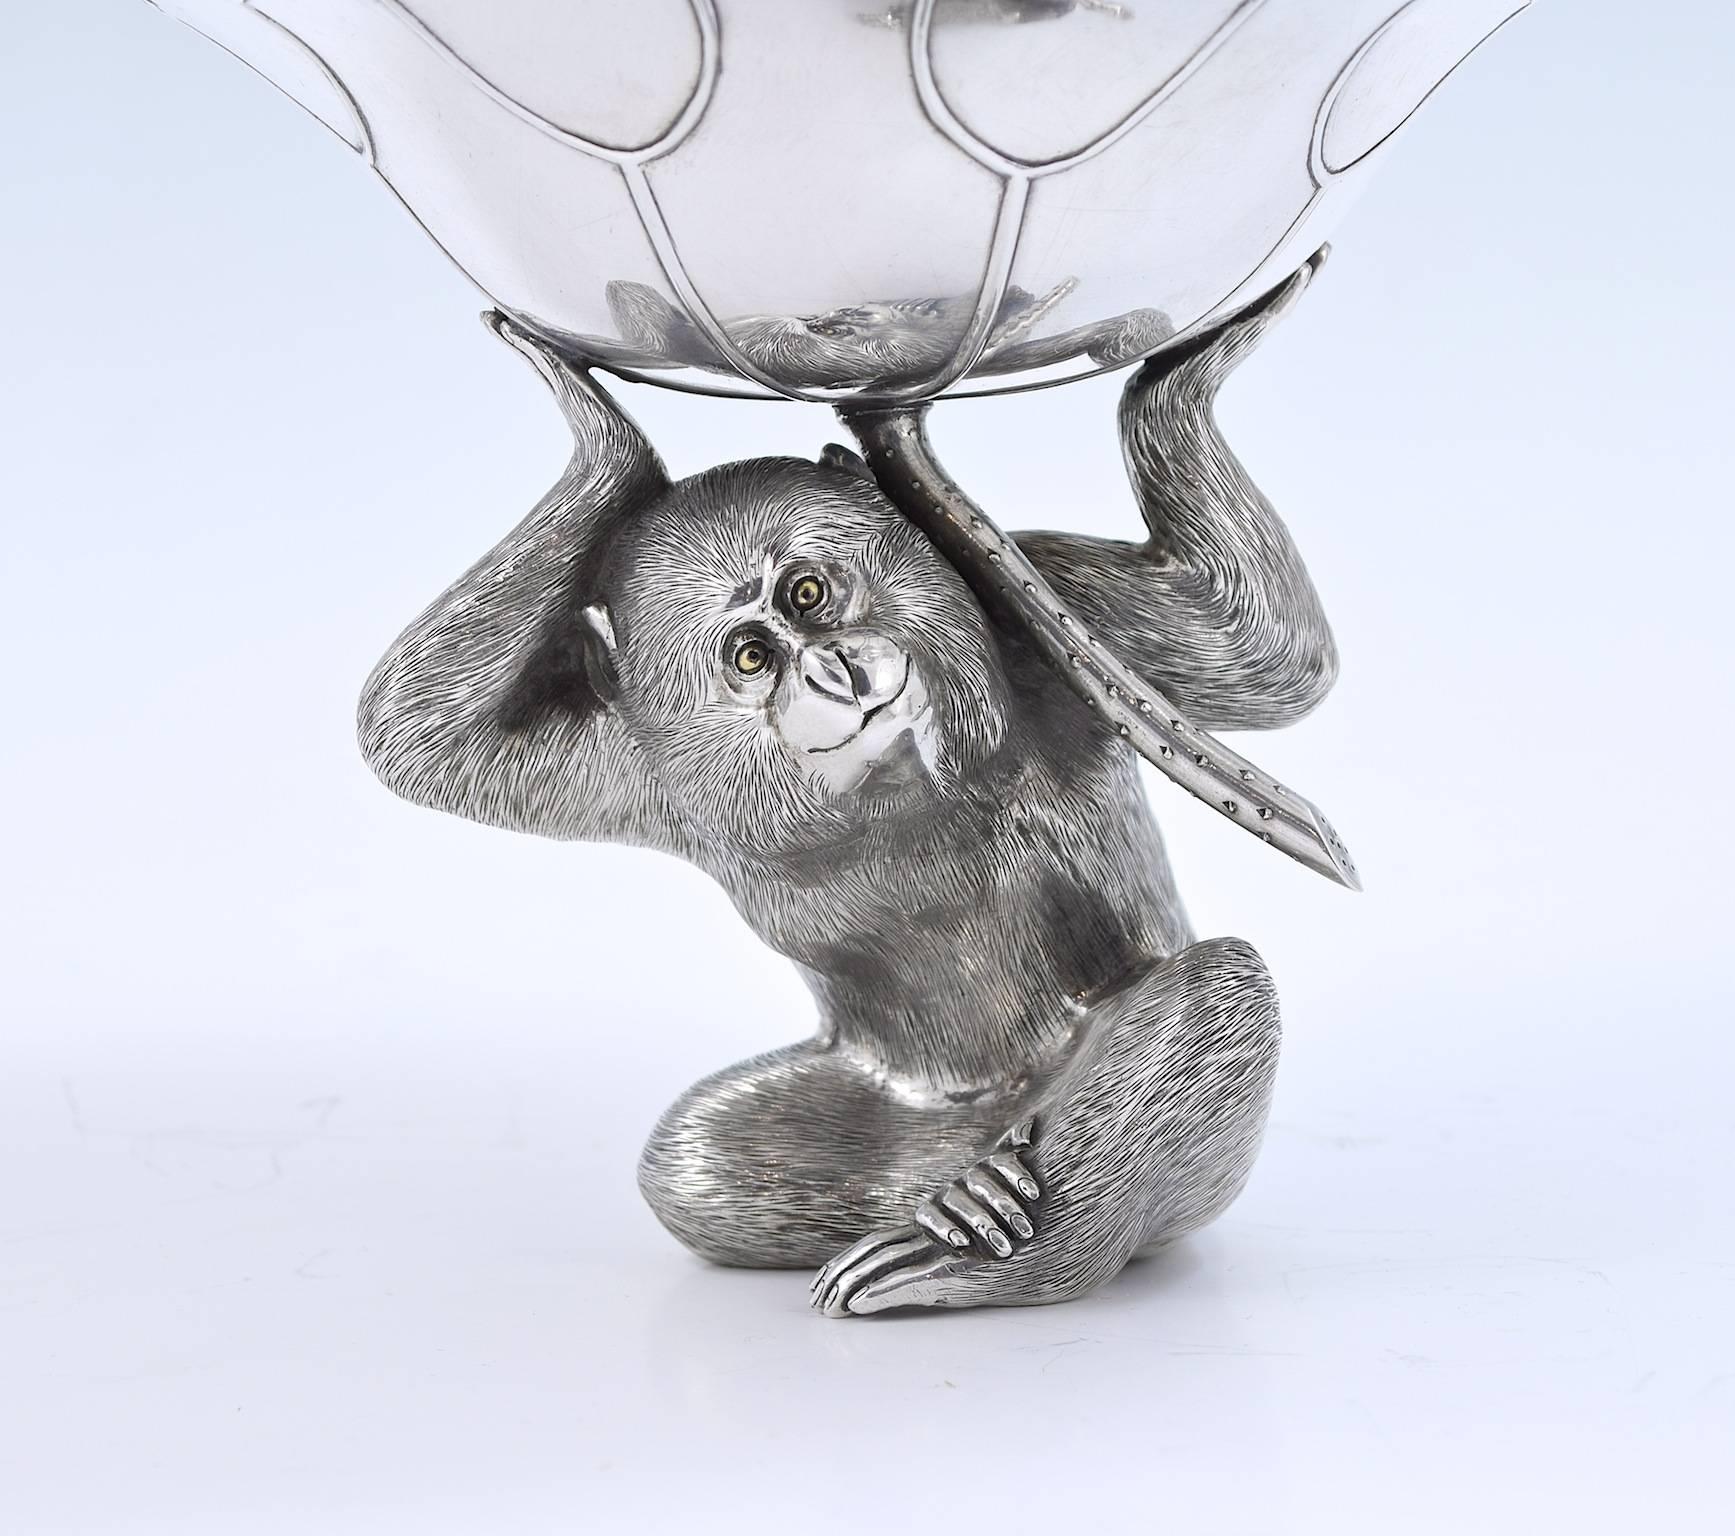 Japanese, solid silver circa 1900 each differently modelled as a Monkey, a Hare, a Cat & a Fox. Each holding a different 'leaf' which forms the dish. Approximate dimensions of each piece: 13cm high, 18cm dish diameter, weight 60.5oz (1887g).